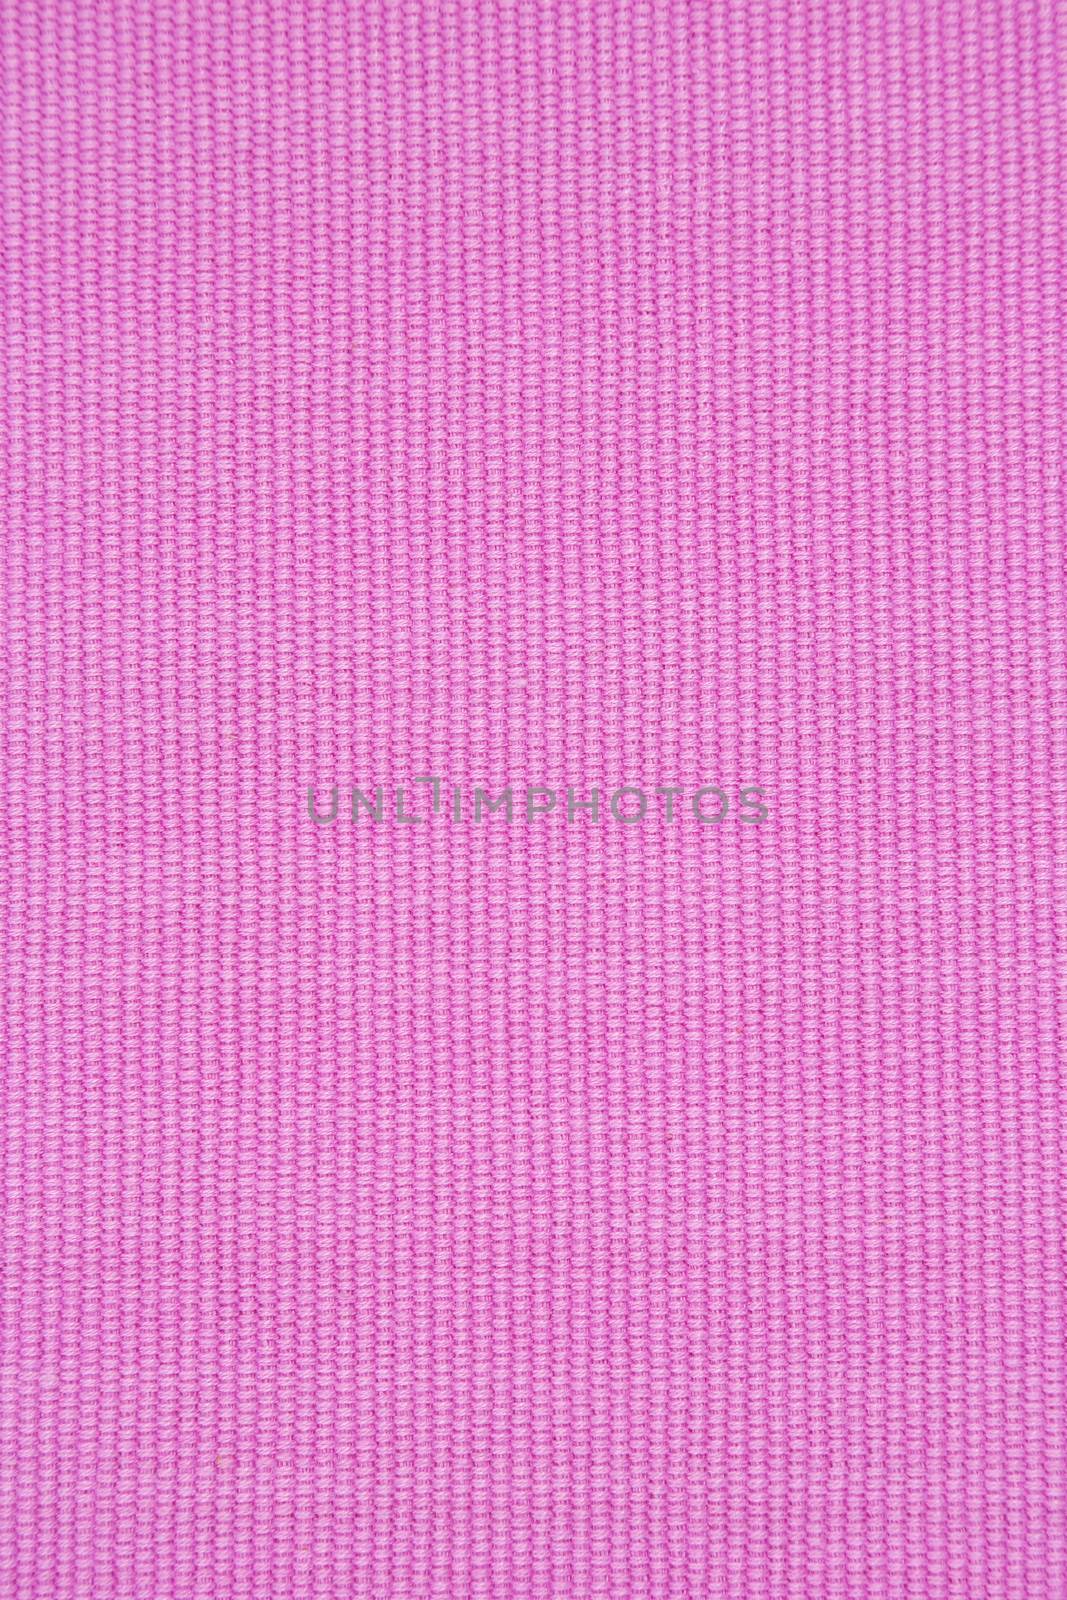 Pink woven cotton place mat - background, full frame